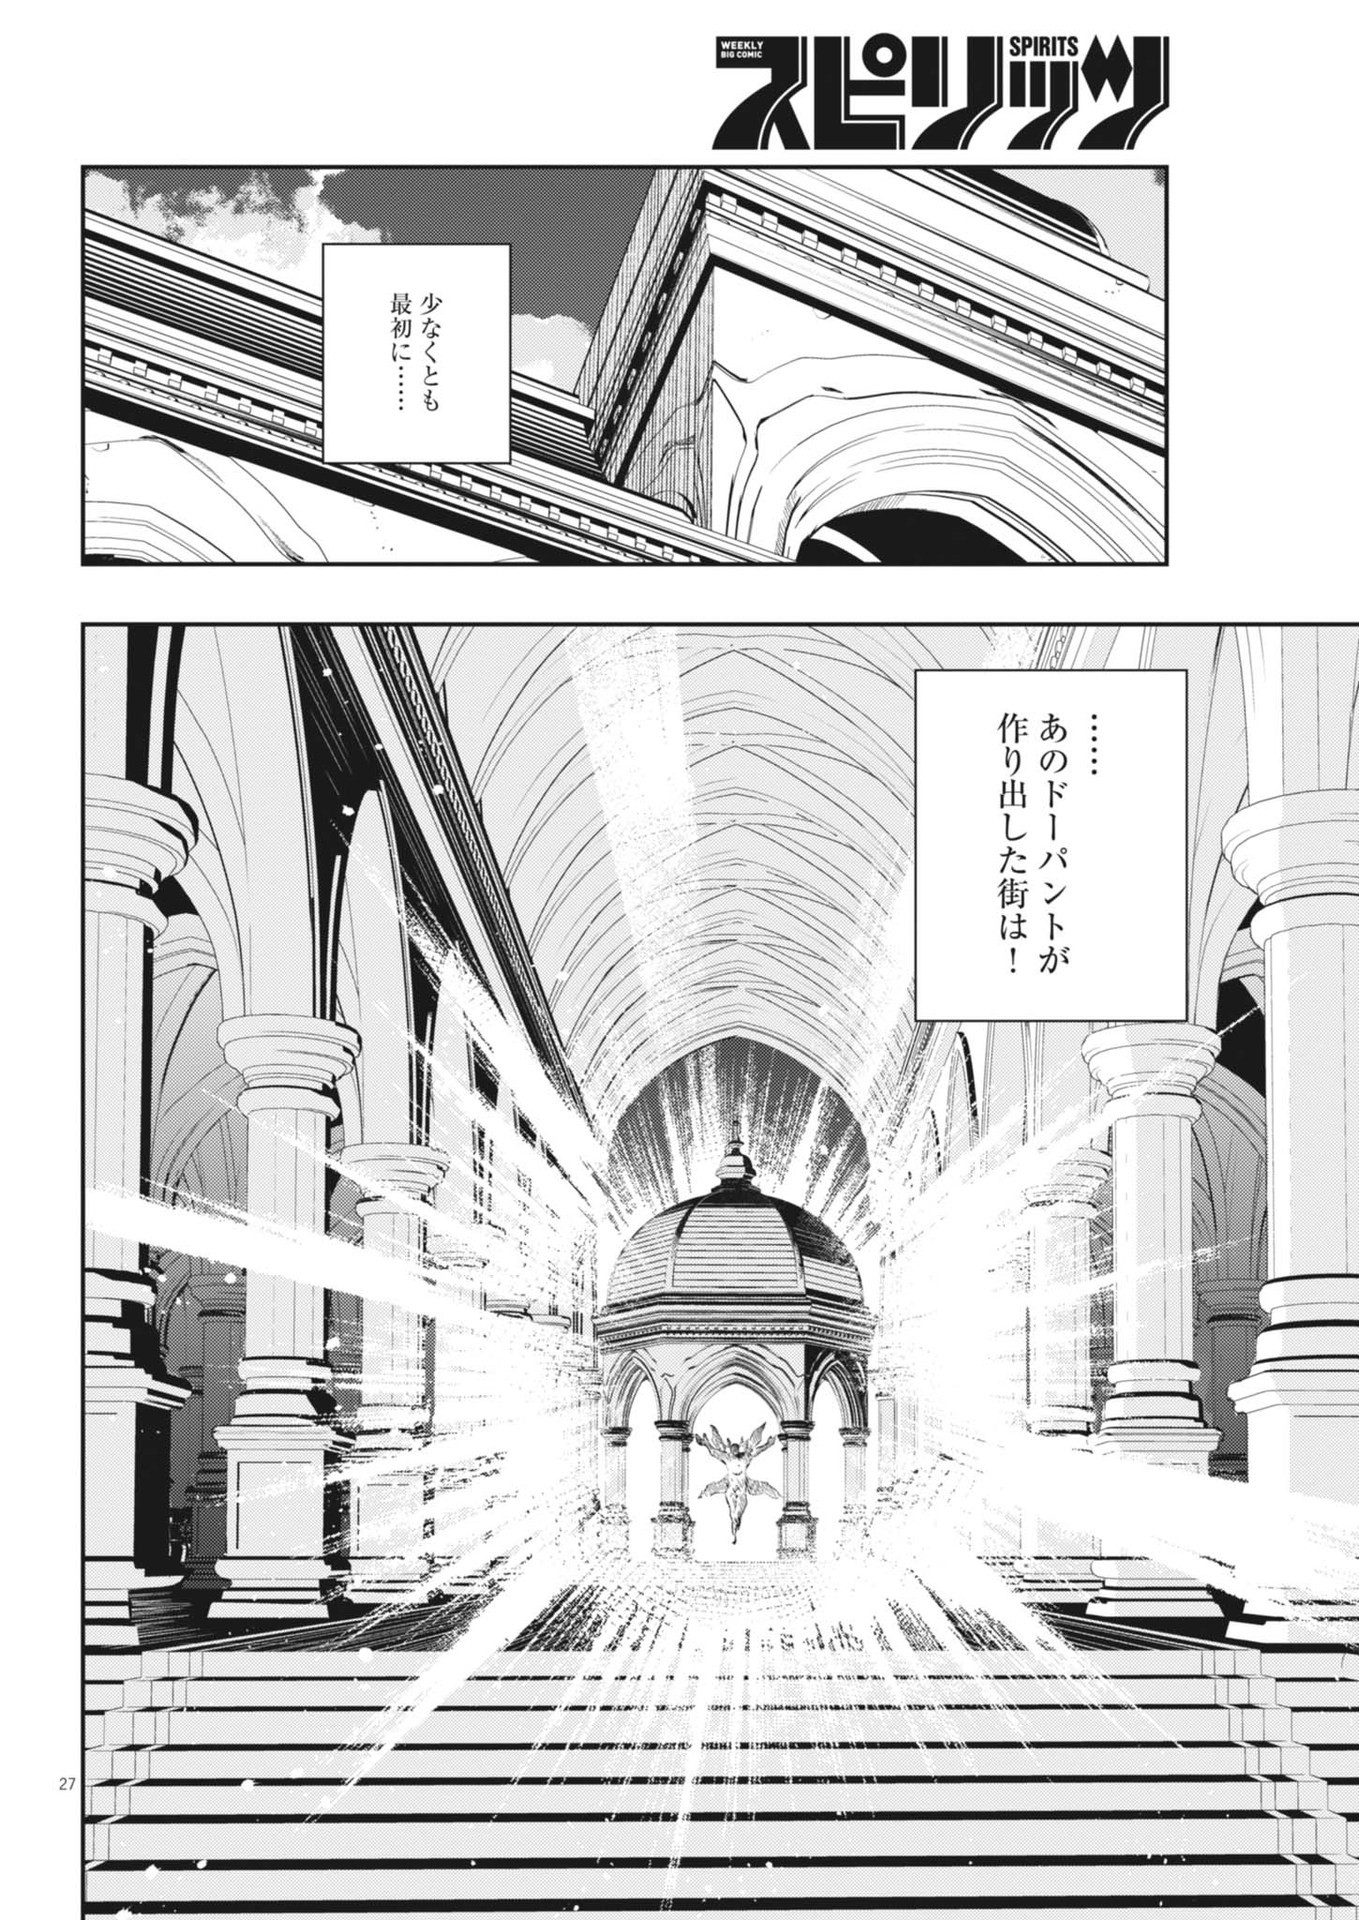 Kamen Rider W: Fuuto Tantei - Chapter 144 - Page 27